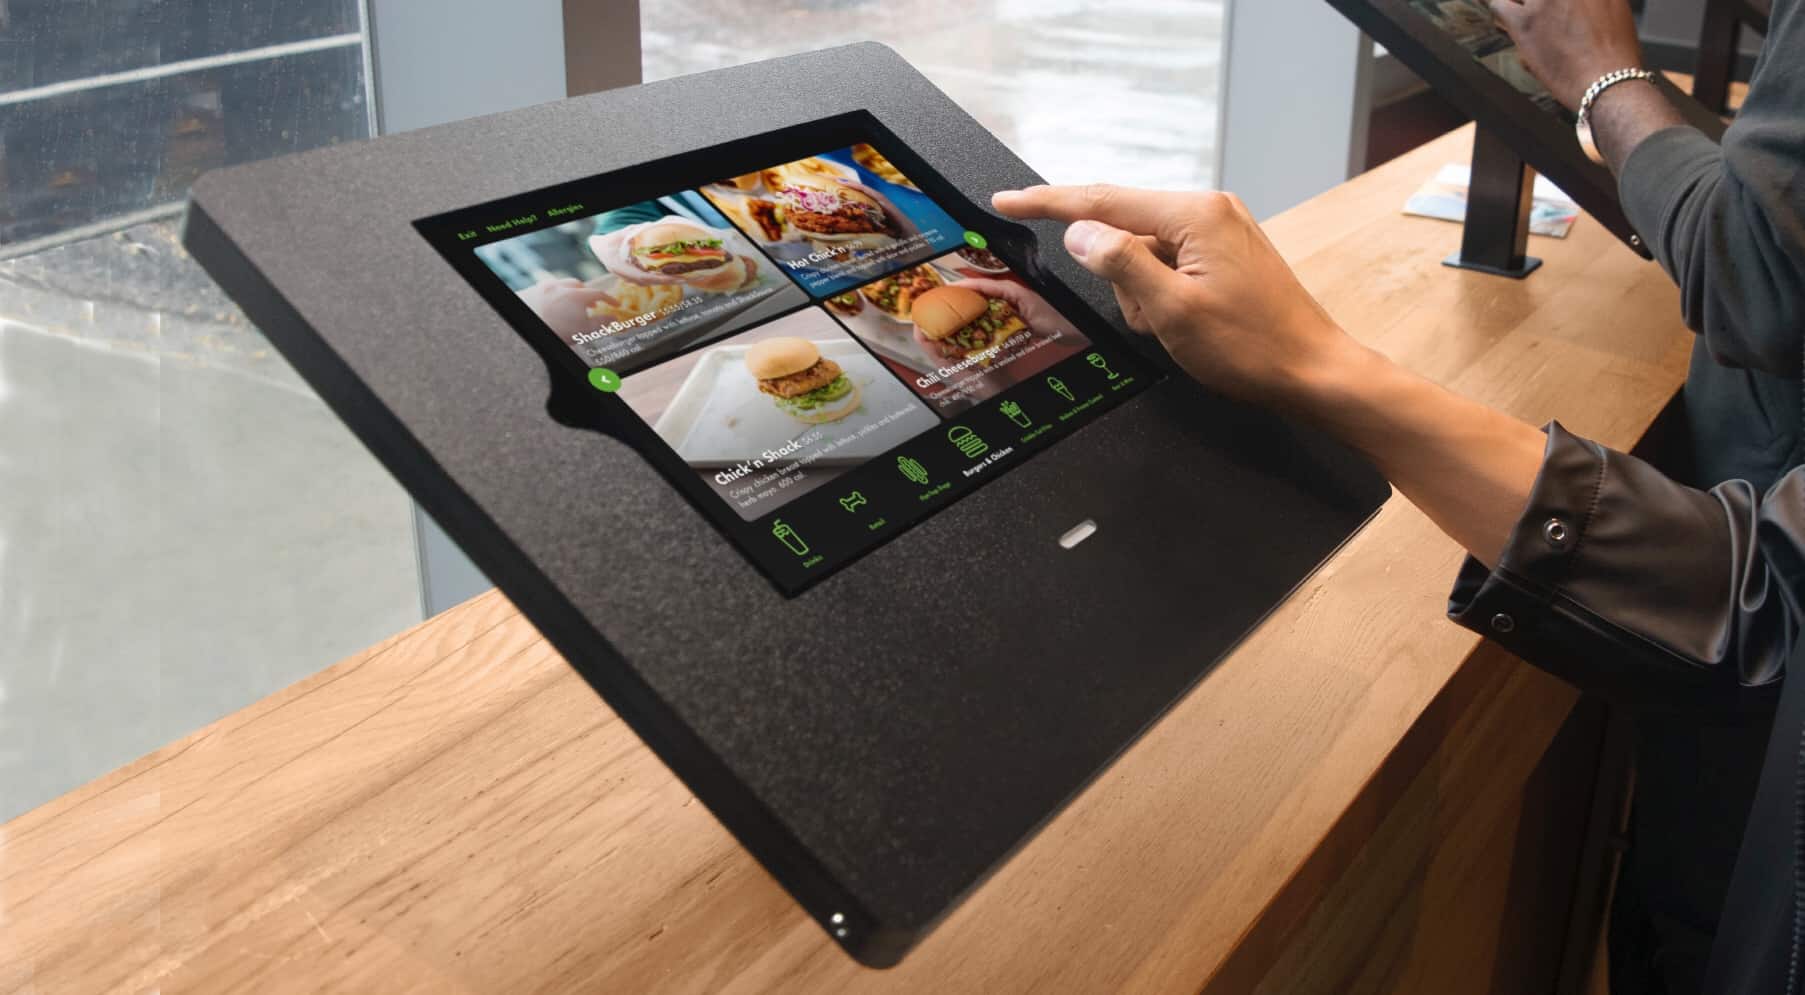 Shake Shack got early access to new a new Square Reader SDK to create a self-service kiosk.